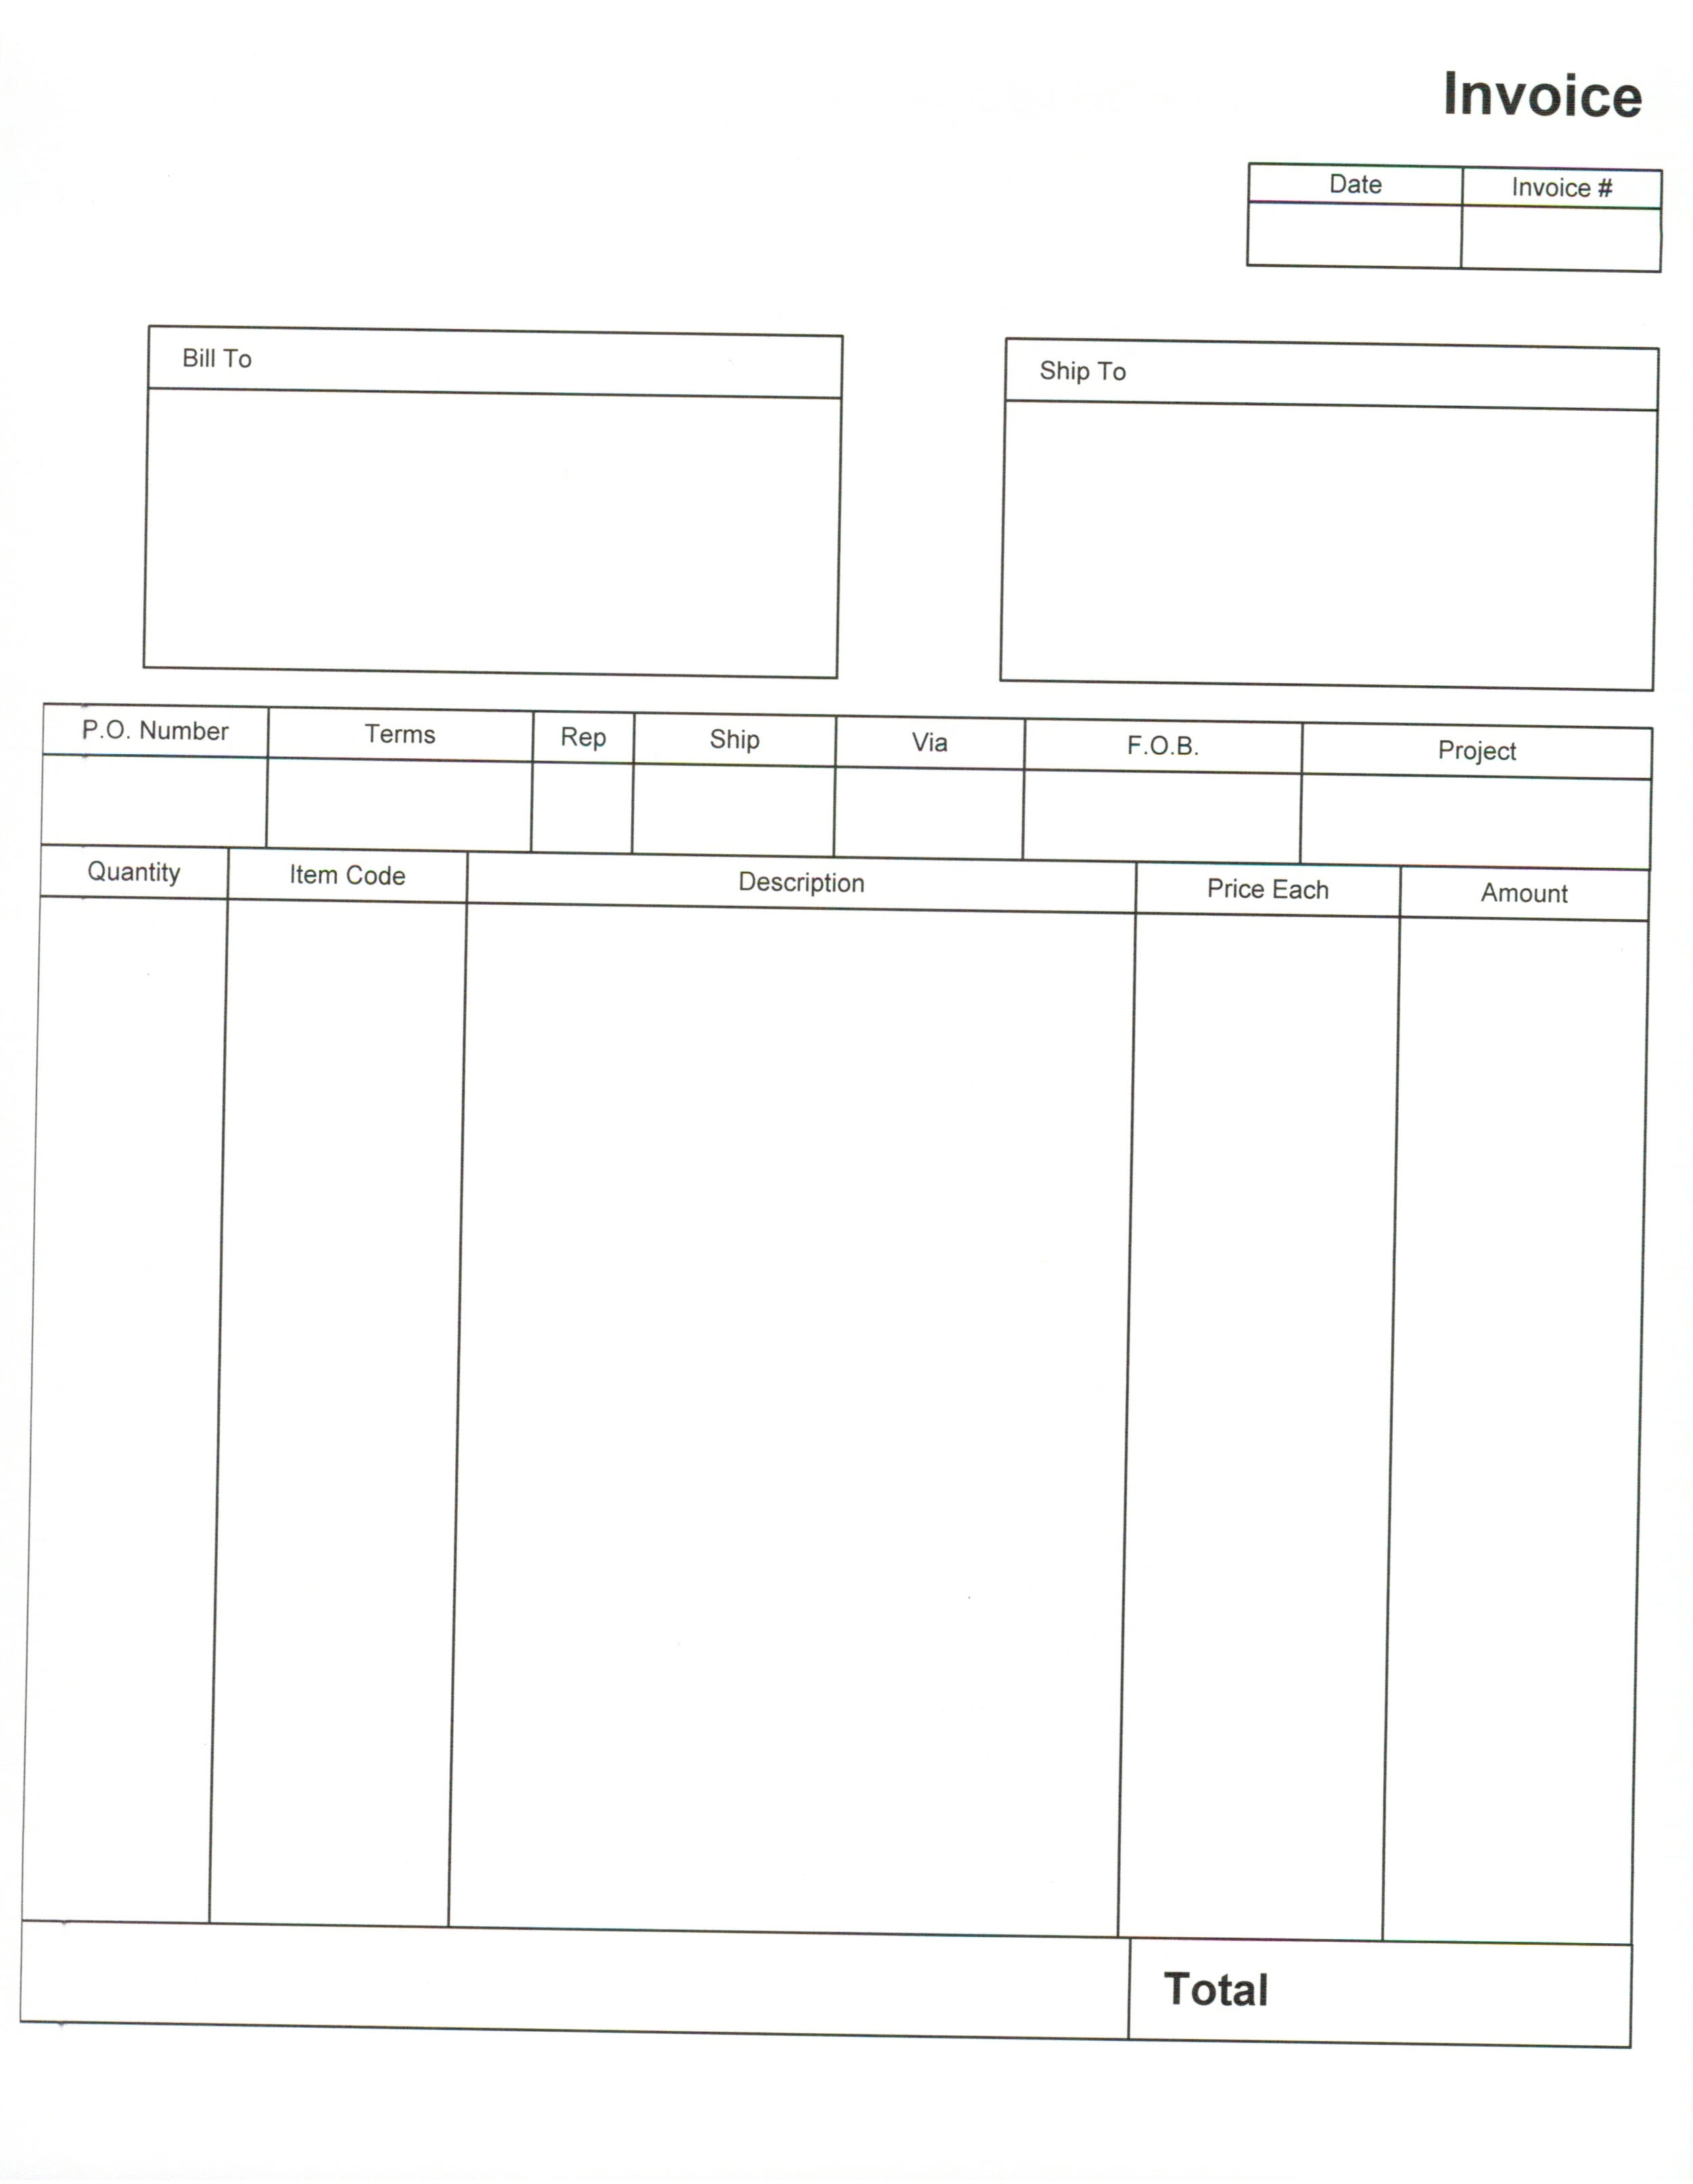 blank-invoices-to-print-invoice-template-ideas